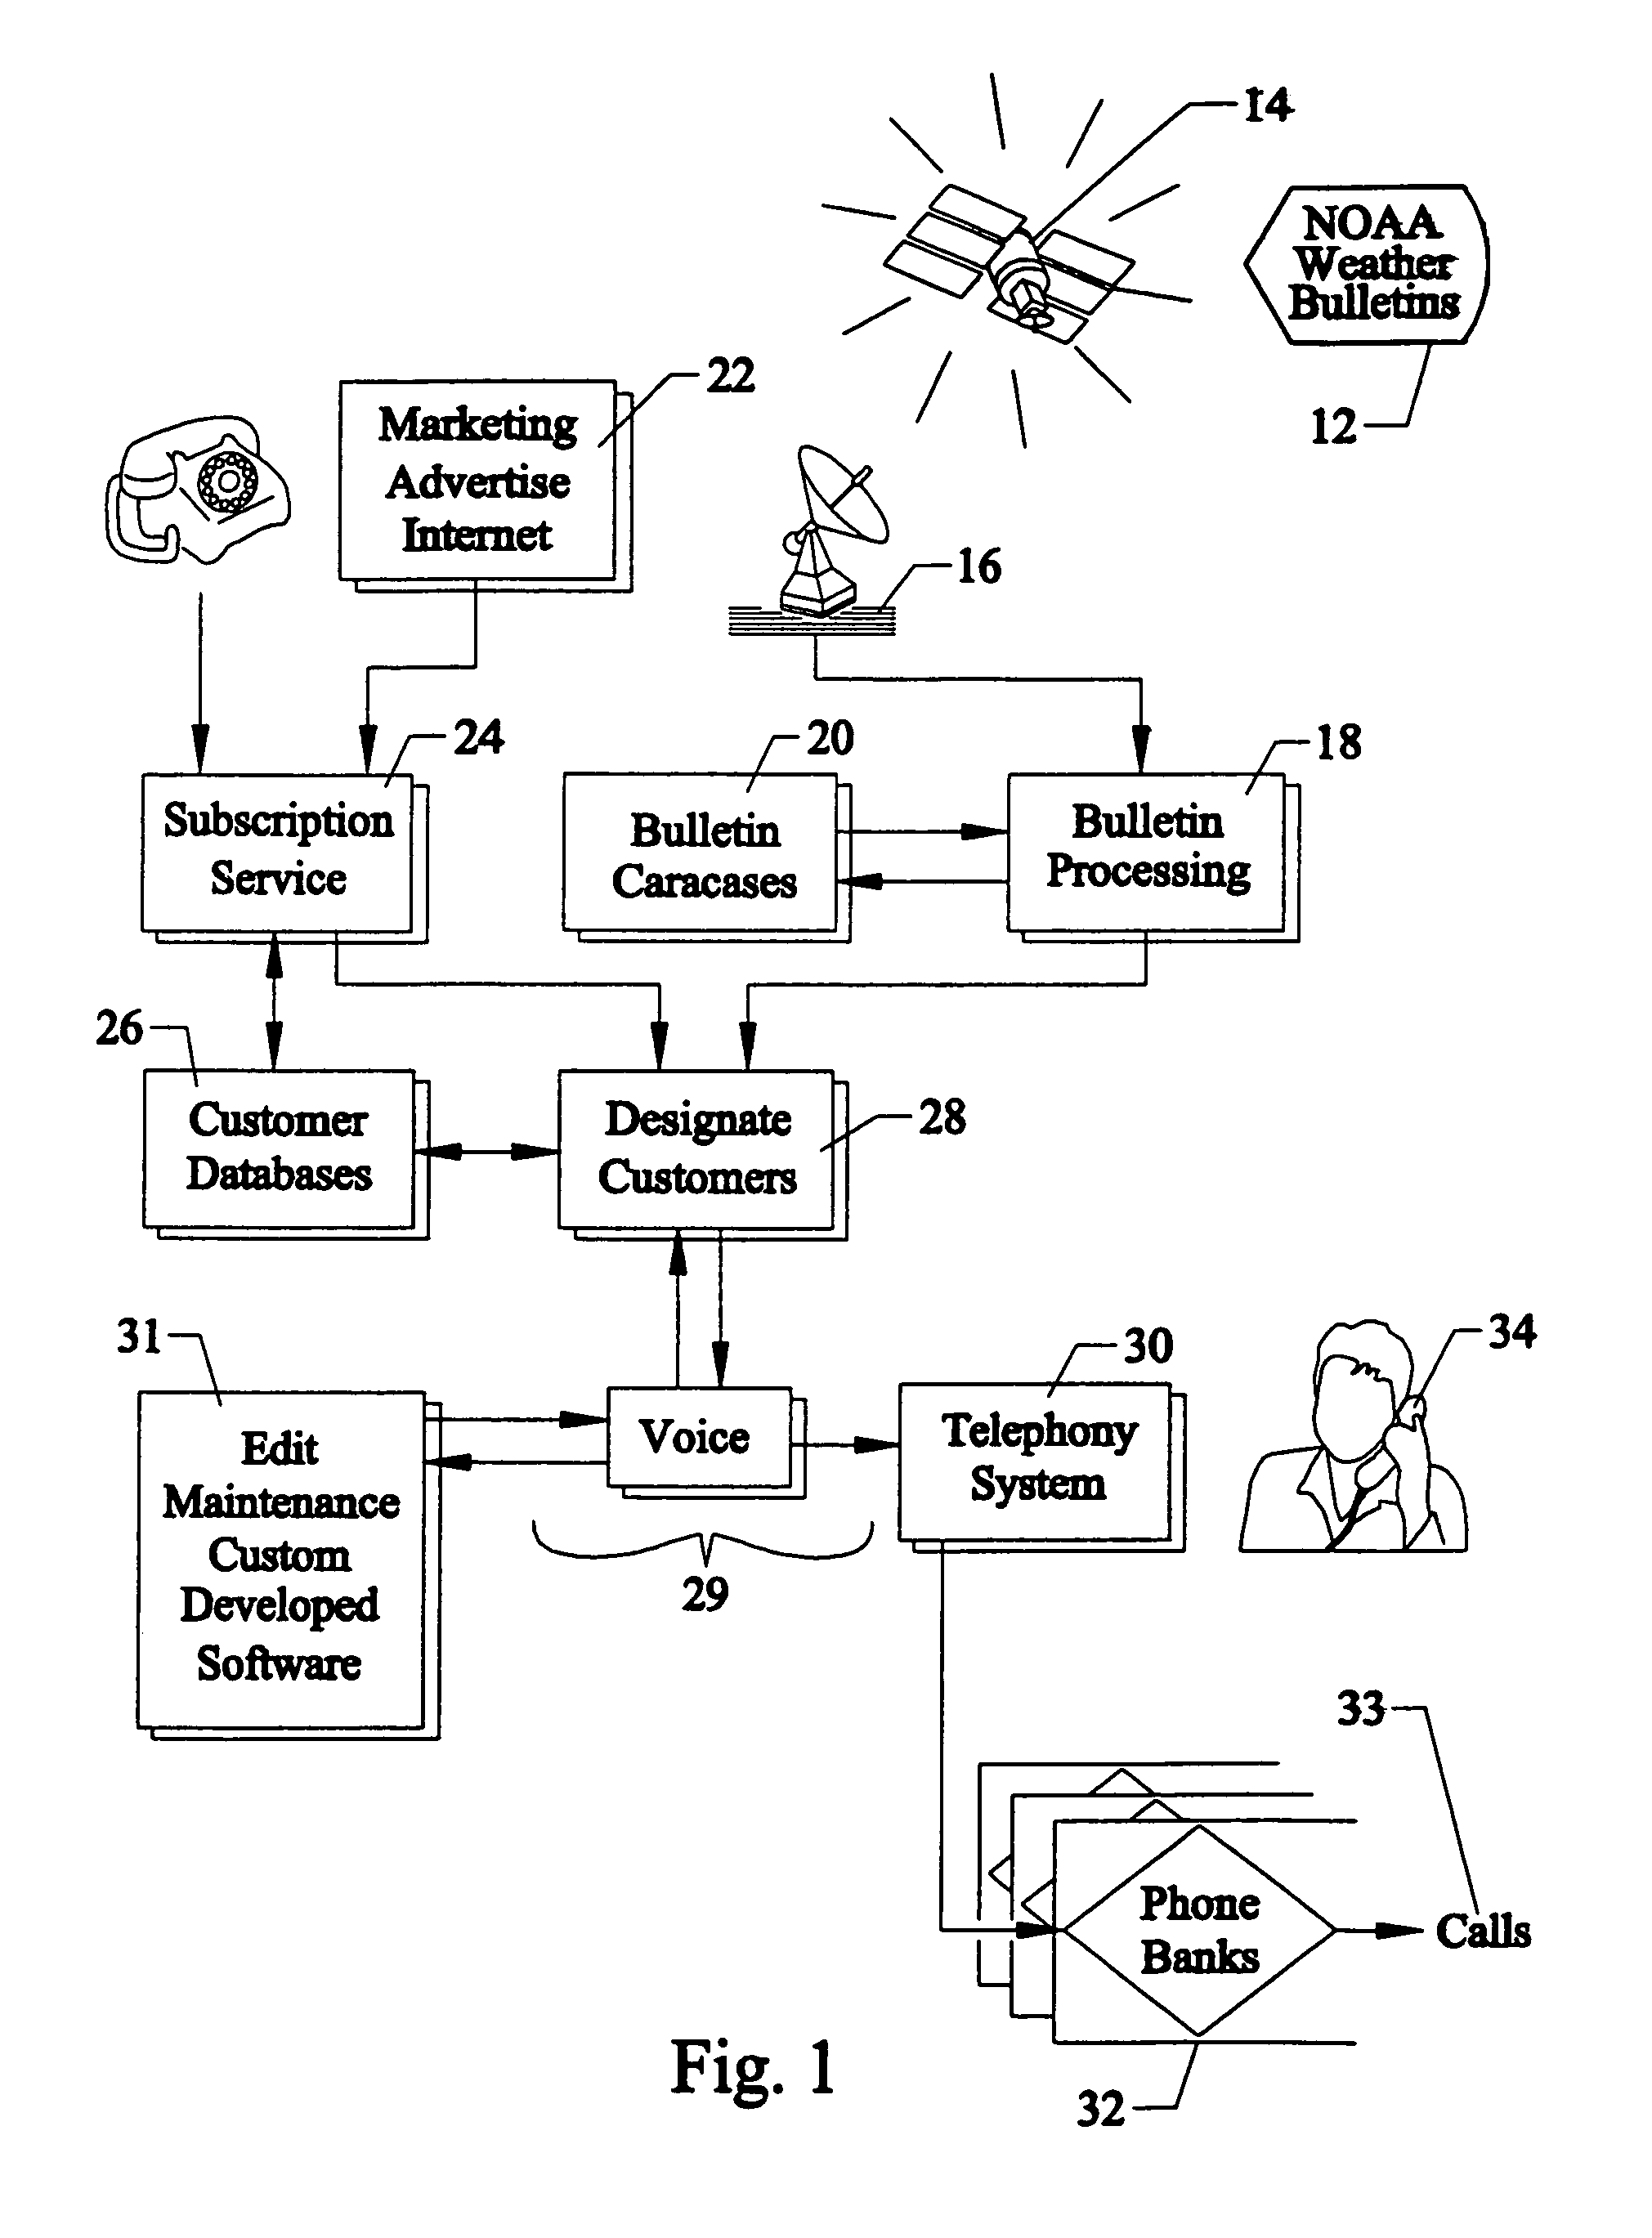 Systems and methods for delivering personalized storm warning messages